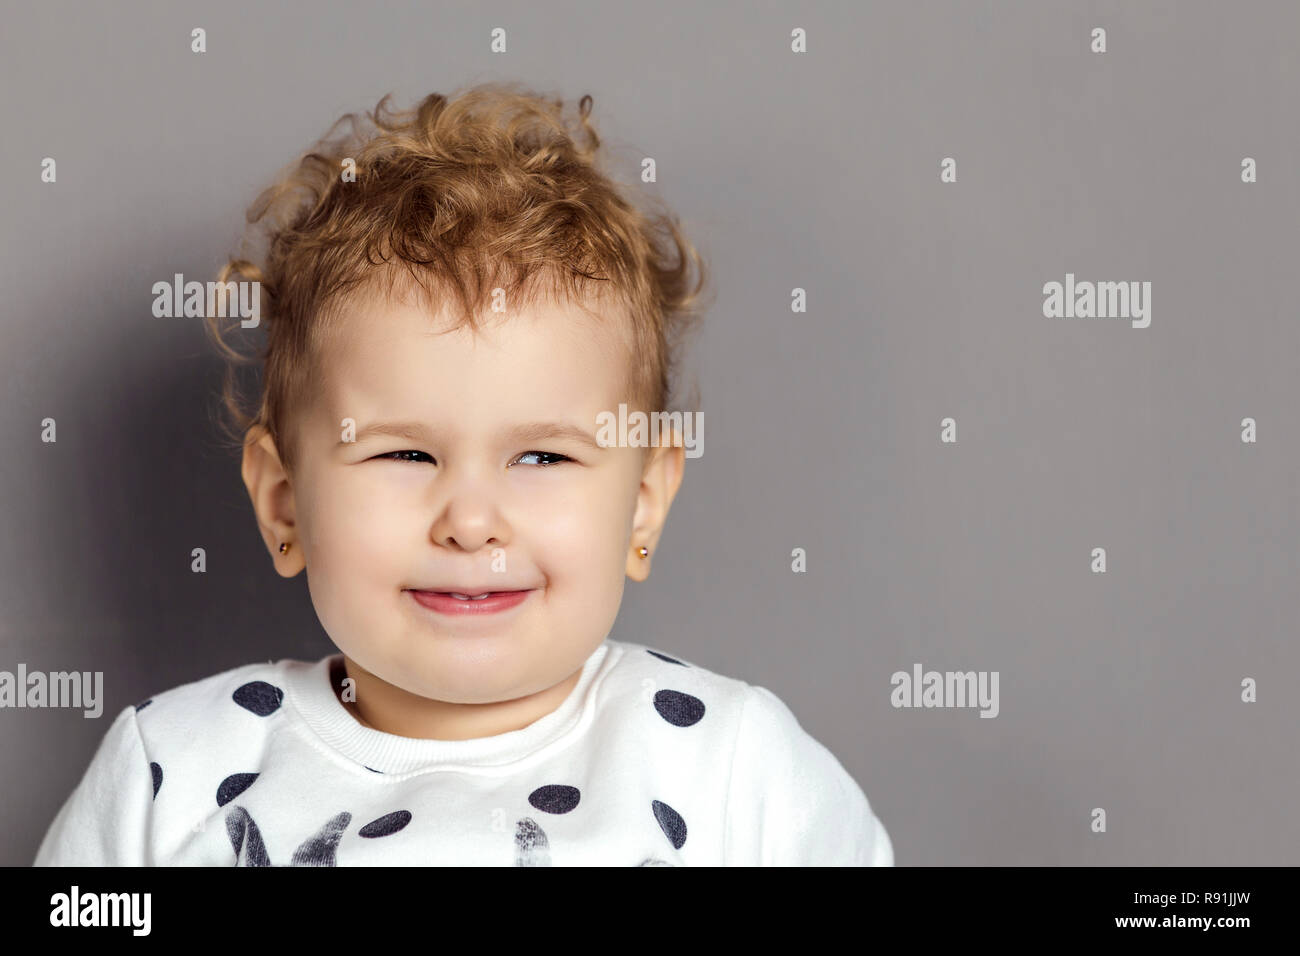 little curly-haired blonde girl with a sly facial expression looks to the side Stock Photo